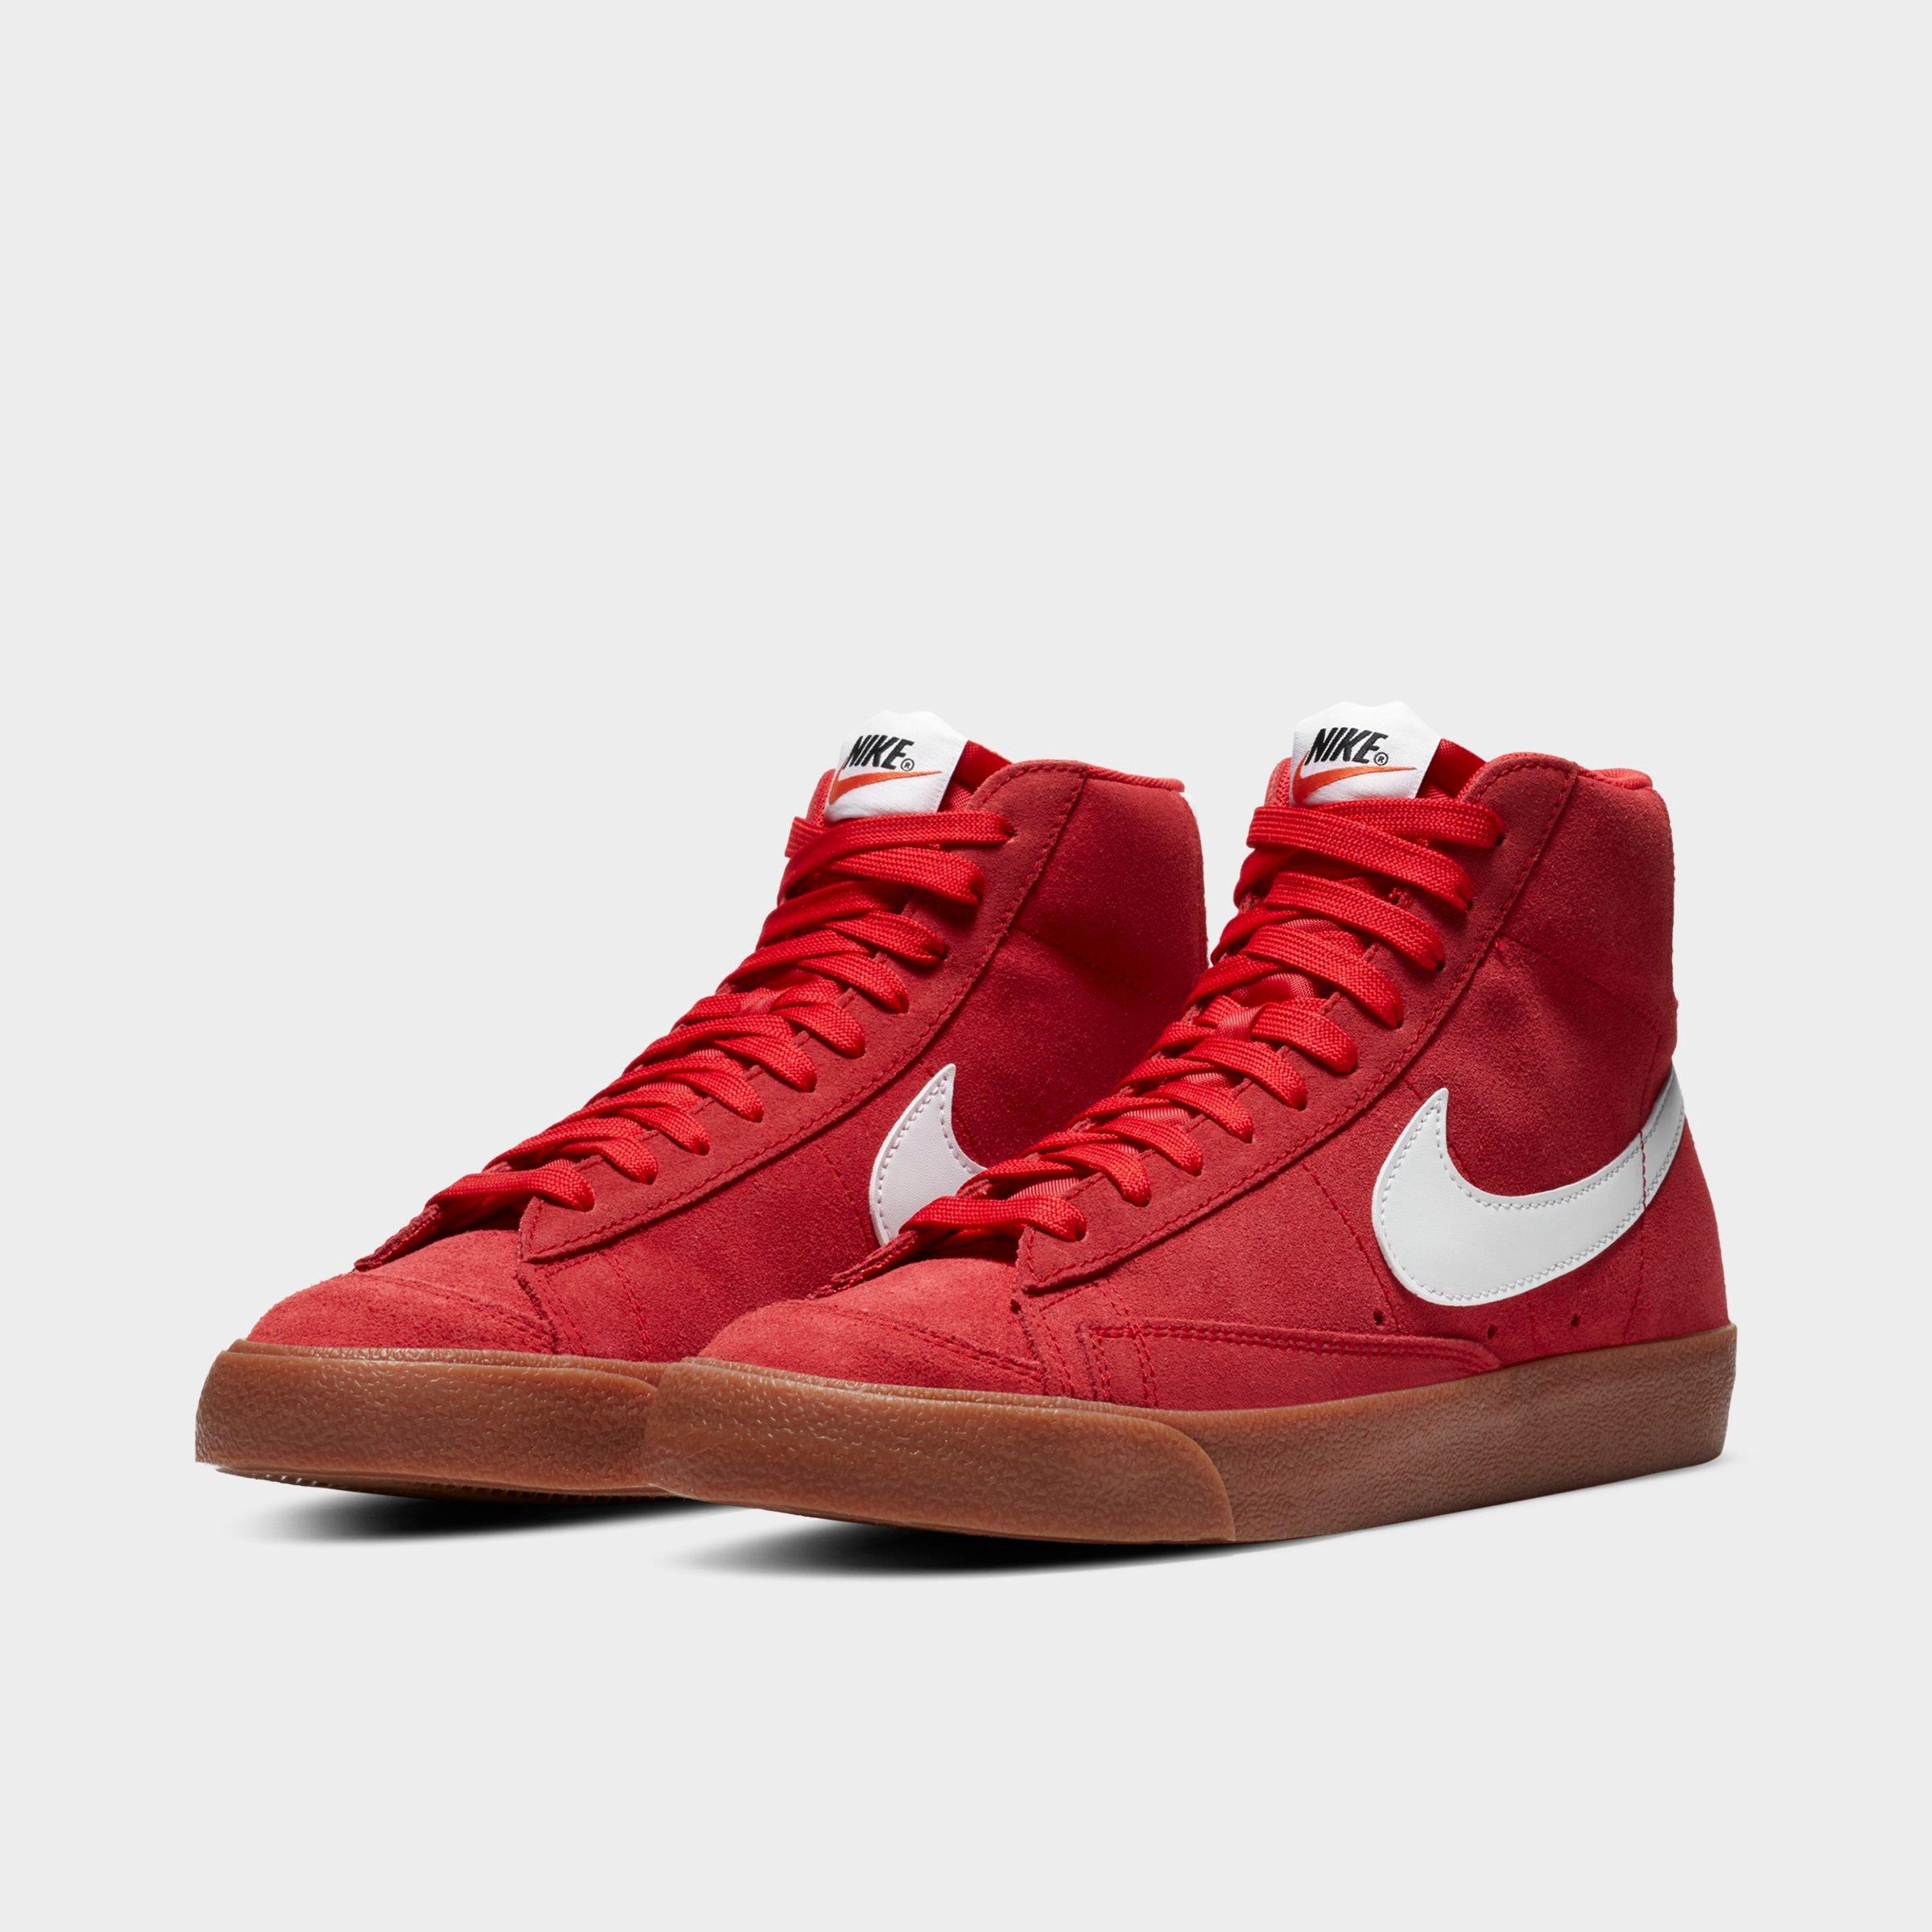 Nike Blazer Mid '77 Suede Casual Shoes 